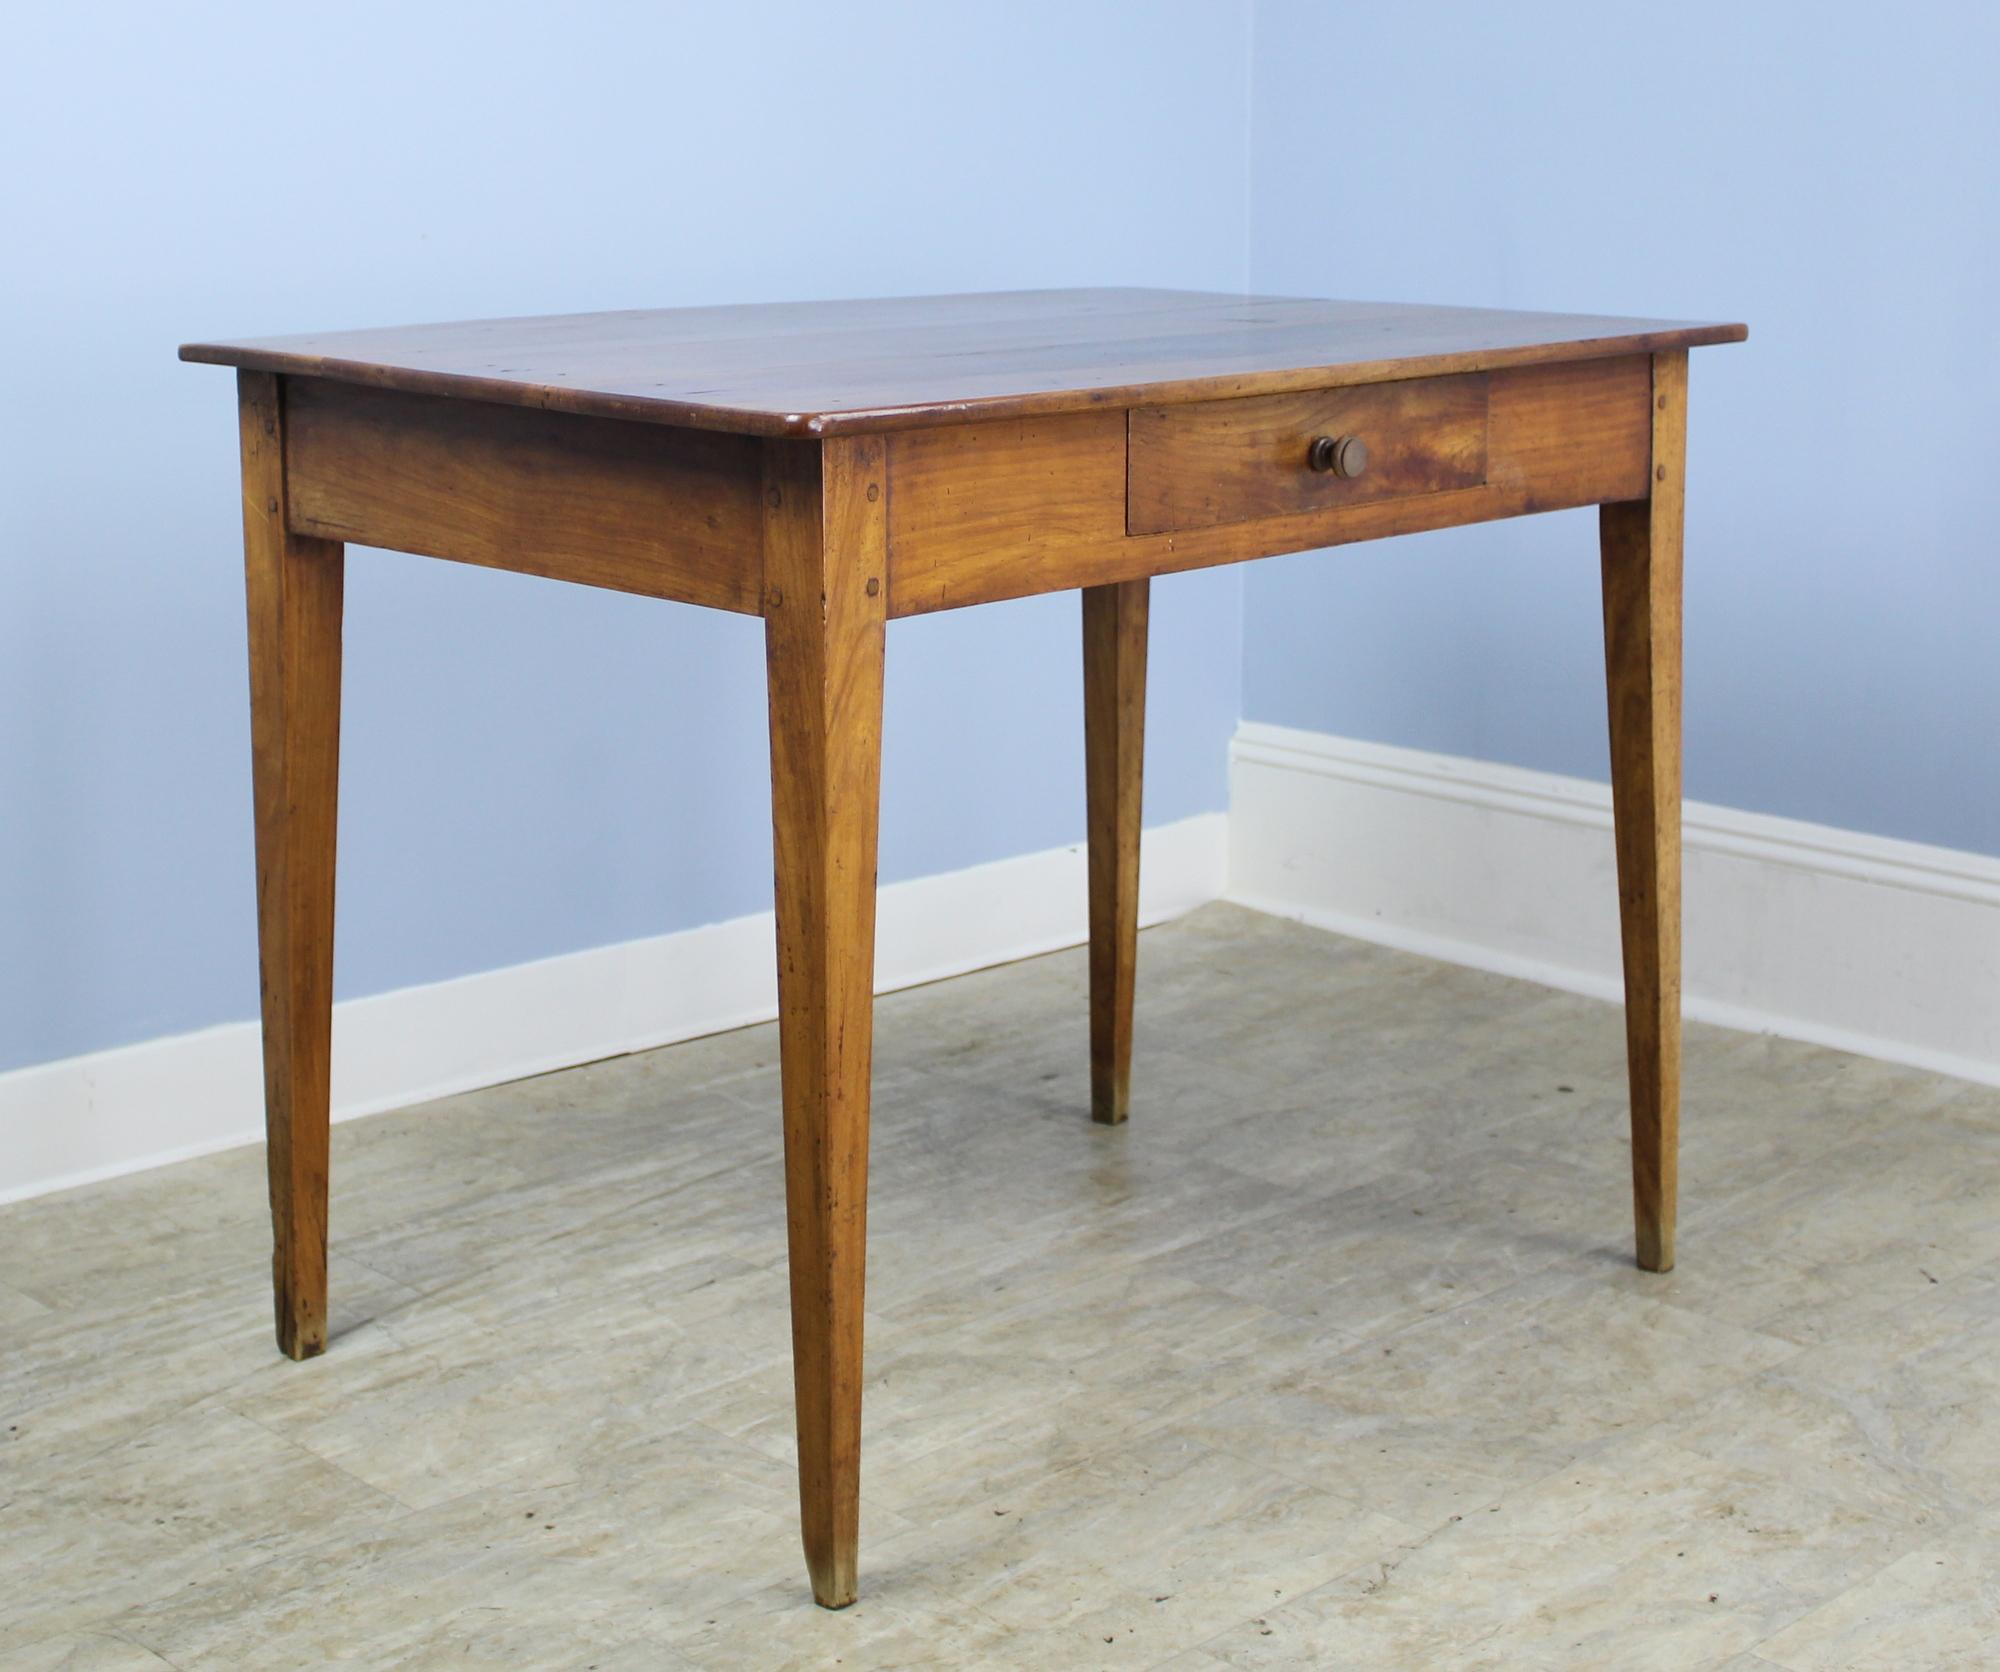 A graceful French antique writing table in vibrant cherry. Elegant tapered legs and a comfortable 24